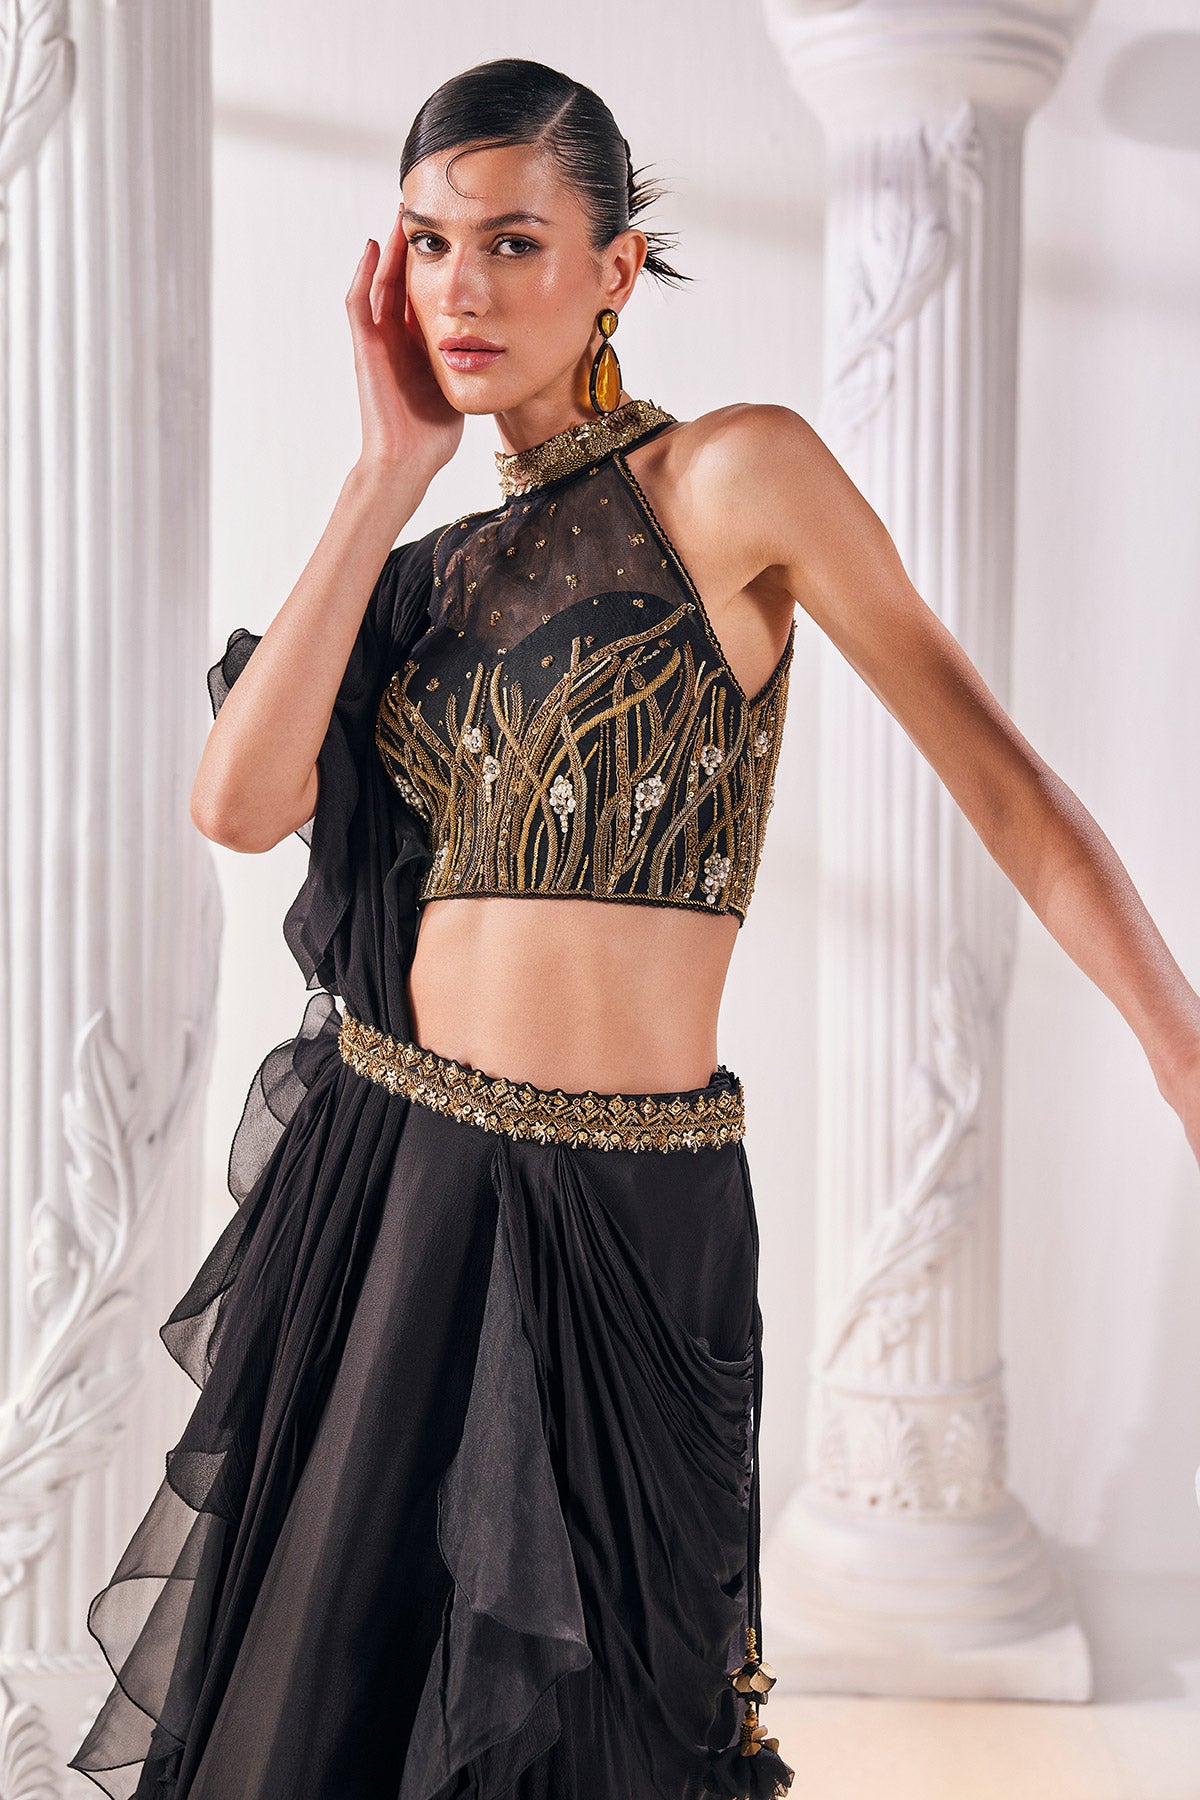 Draped Saree In Chiffon Paired With An Embroidered Organza Blouse And A Belt.